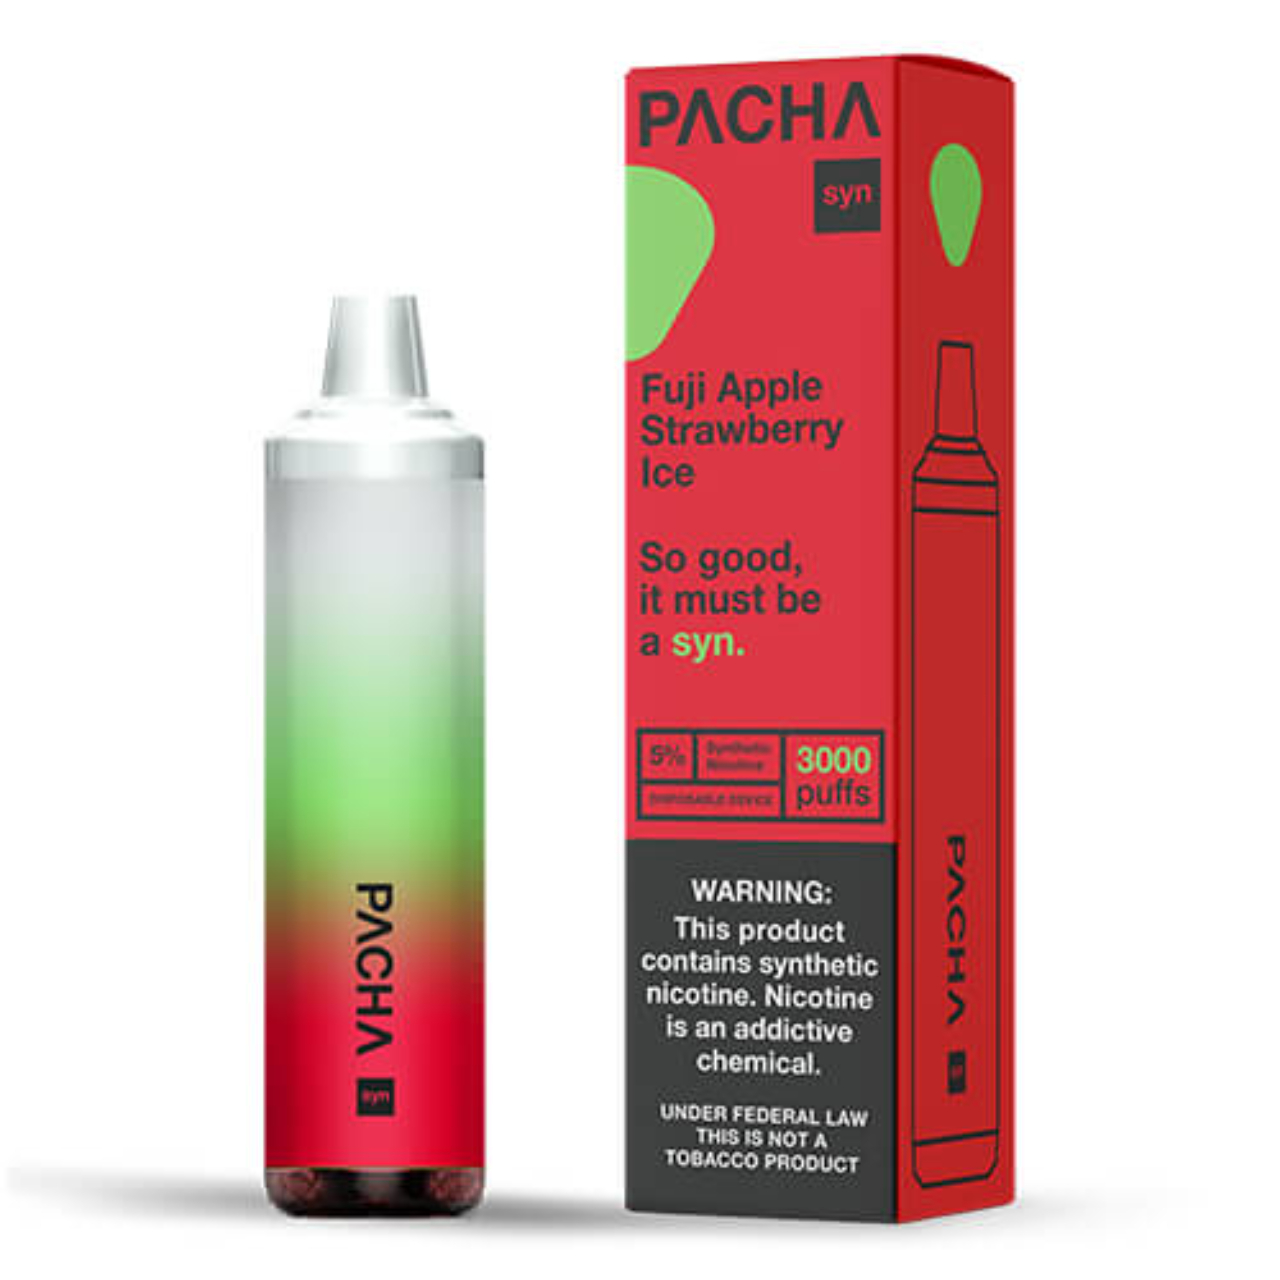 Pachamama Syn 3000 Puff Synthetic Nicotine Disposable-Fuji Apple Strawberry Ice